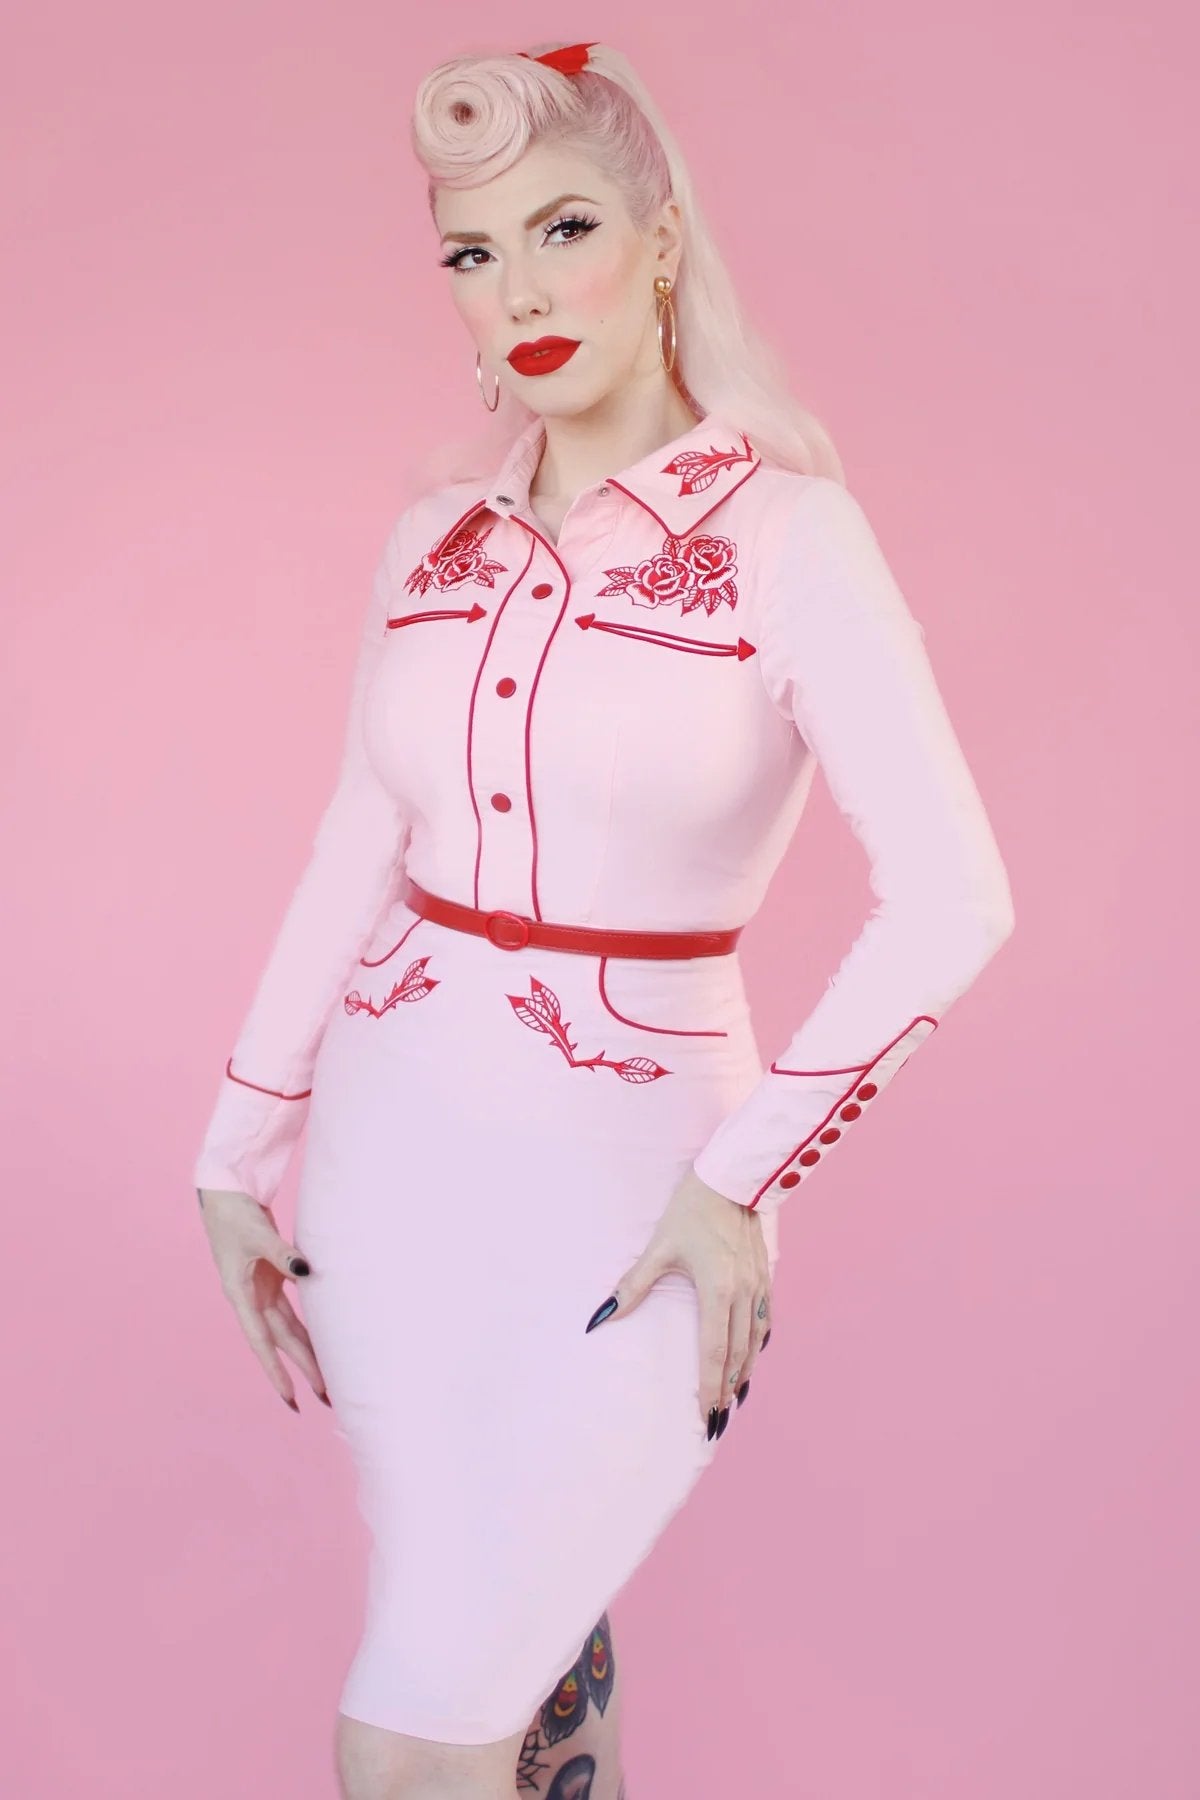 Shop Katakomb June Carter western fitted wiggle dress in baby pink with red embroidery and detailing. Long sleeve with covered buttons and rose embellishments. Perfect for spring summer if you want a vintage pin up style 1940s 1950s look. Girly and curve flattering